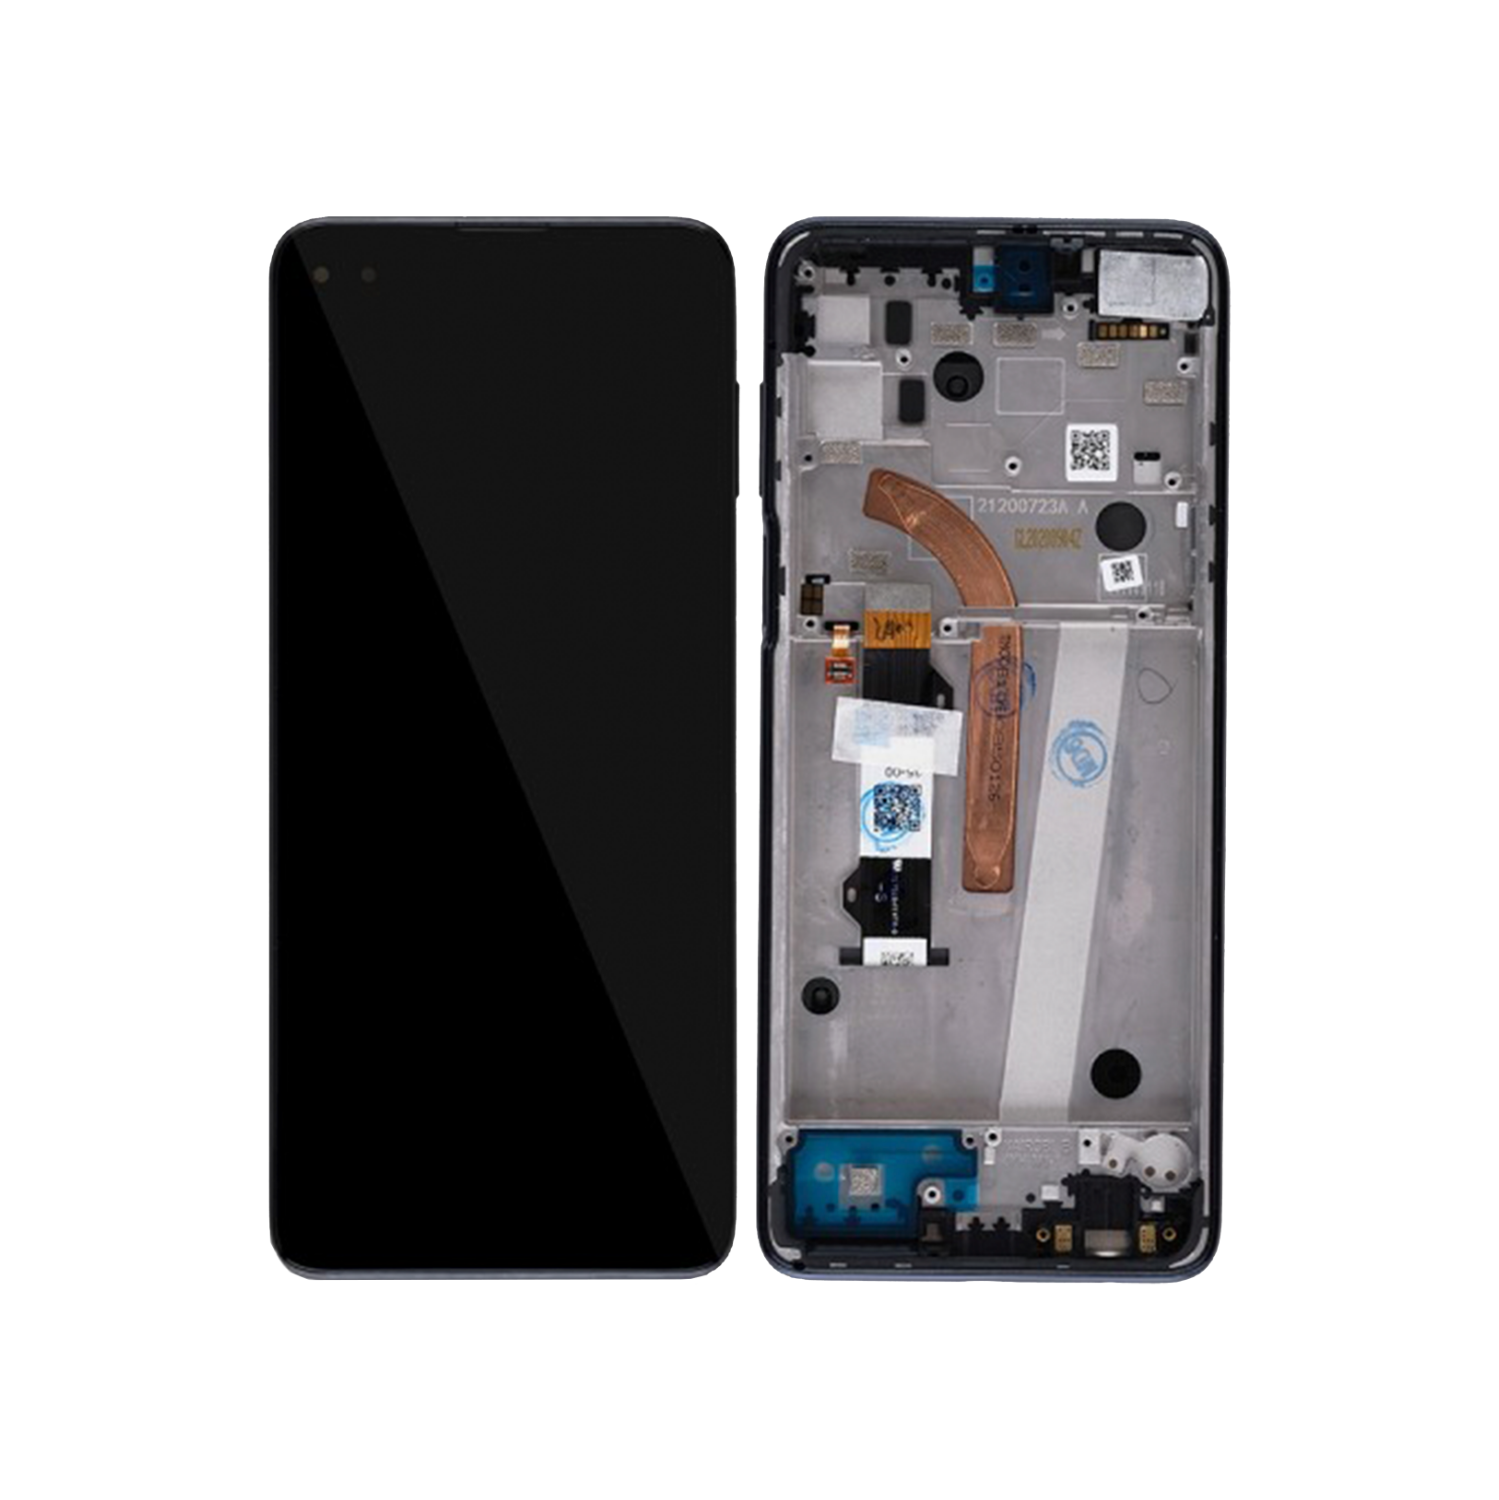 Replacement LCD Assembly With Frame Compatible For Motorola Moto G 5G Plus (XT2075 / 2020) / One 5G (XT2075 / 2020) (Genuine OEM) (Surfing Blue)